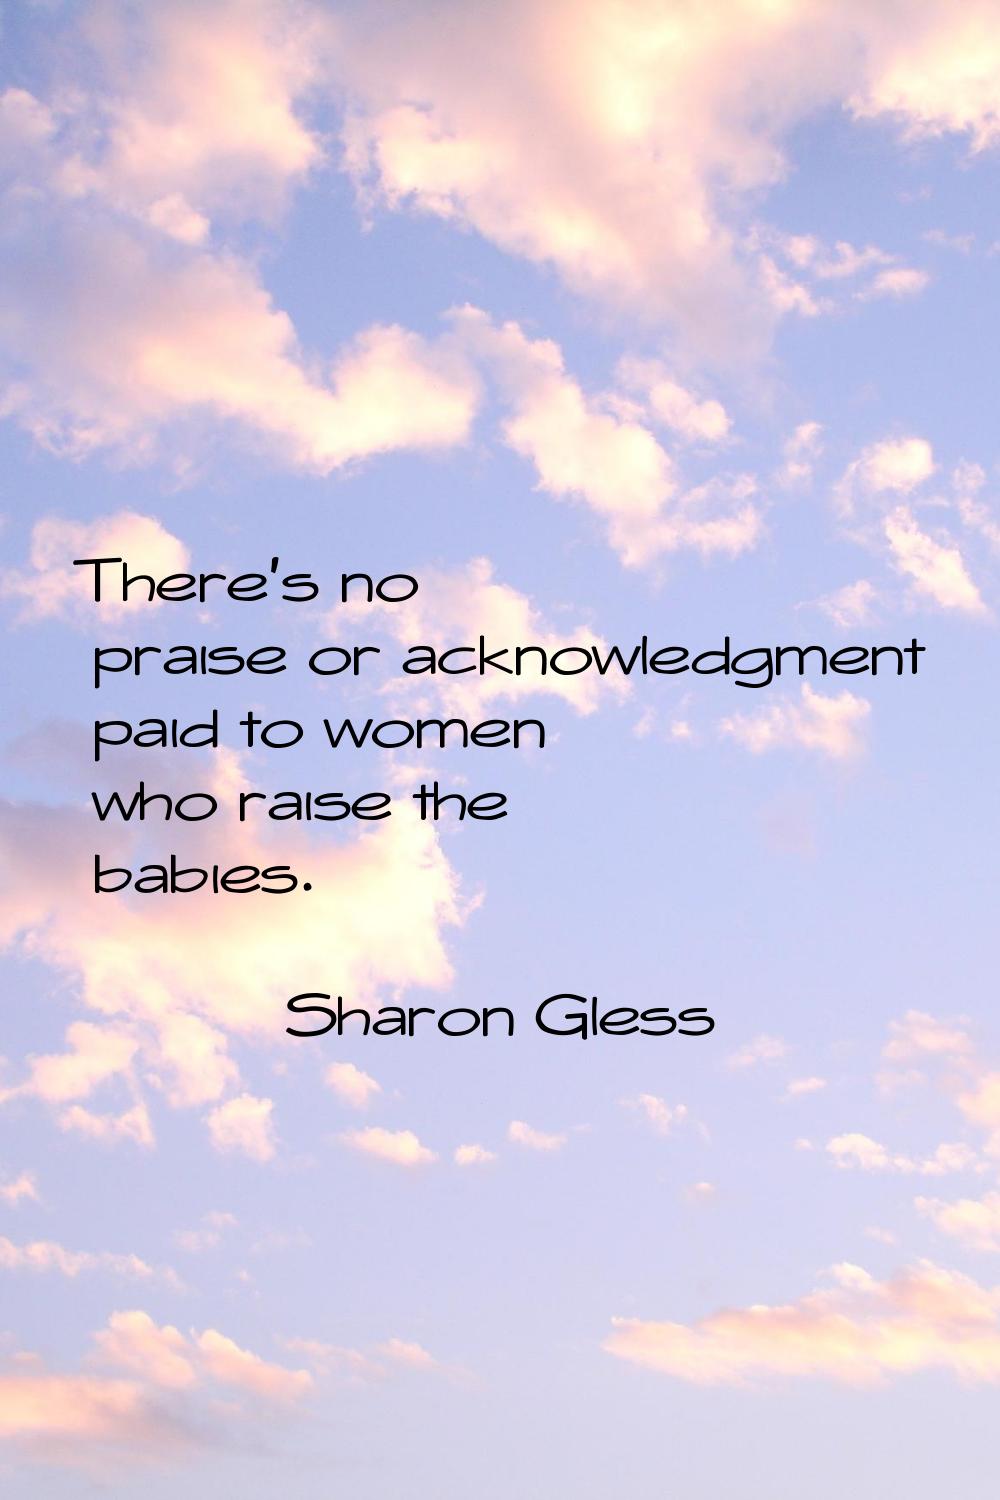 There's no praise or acknowledgment paid to women who raise the babies.